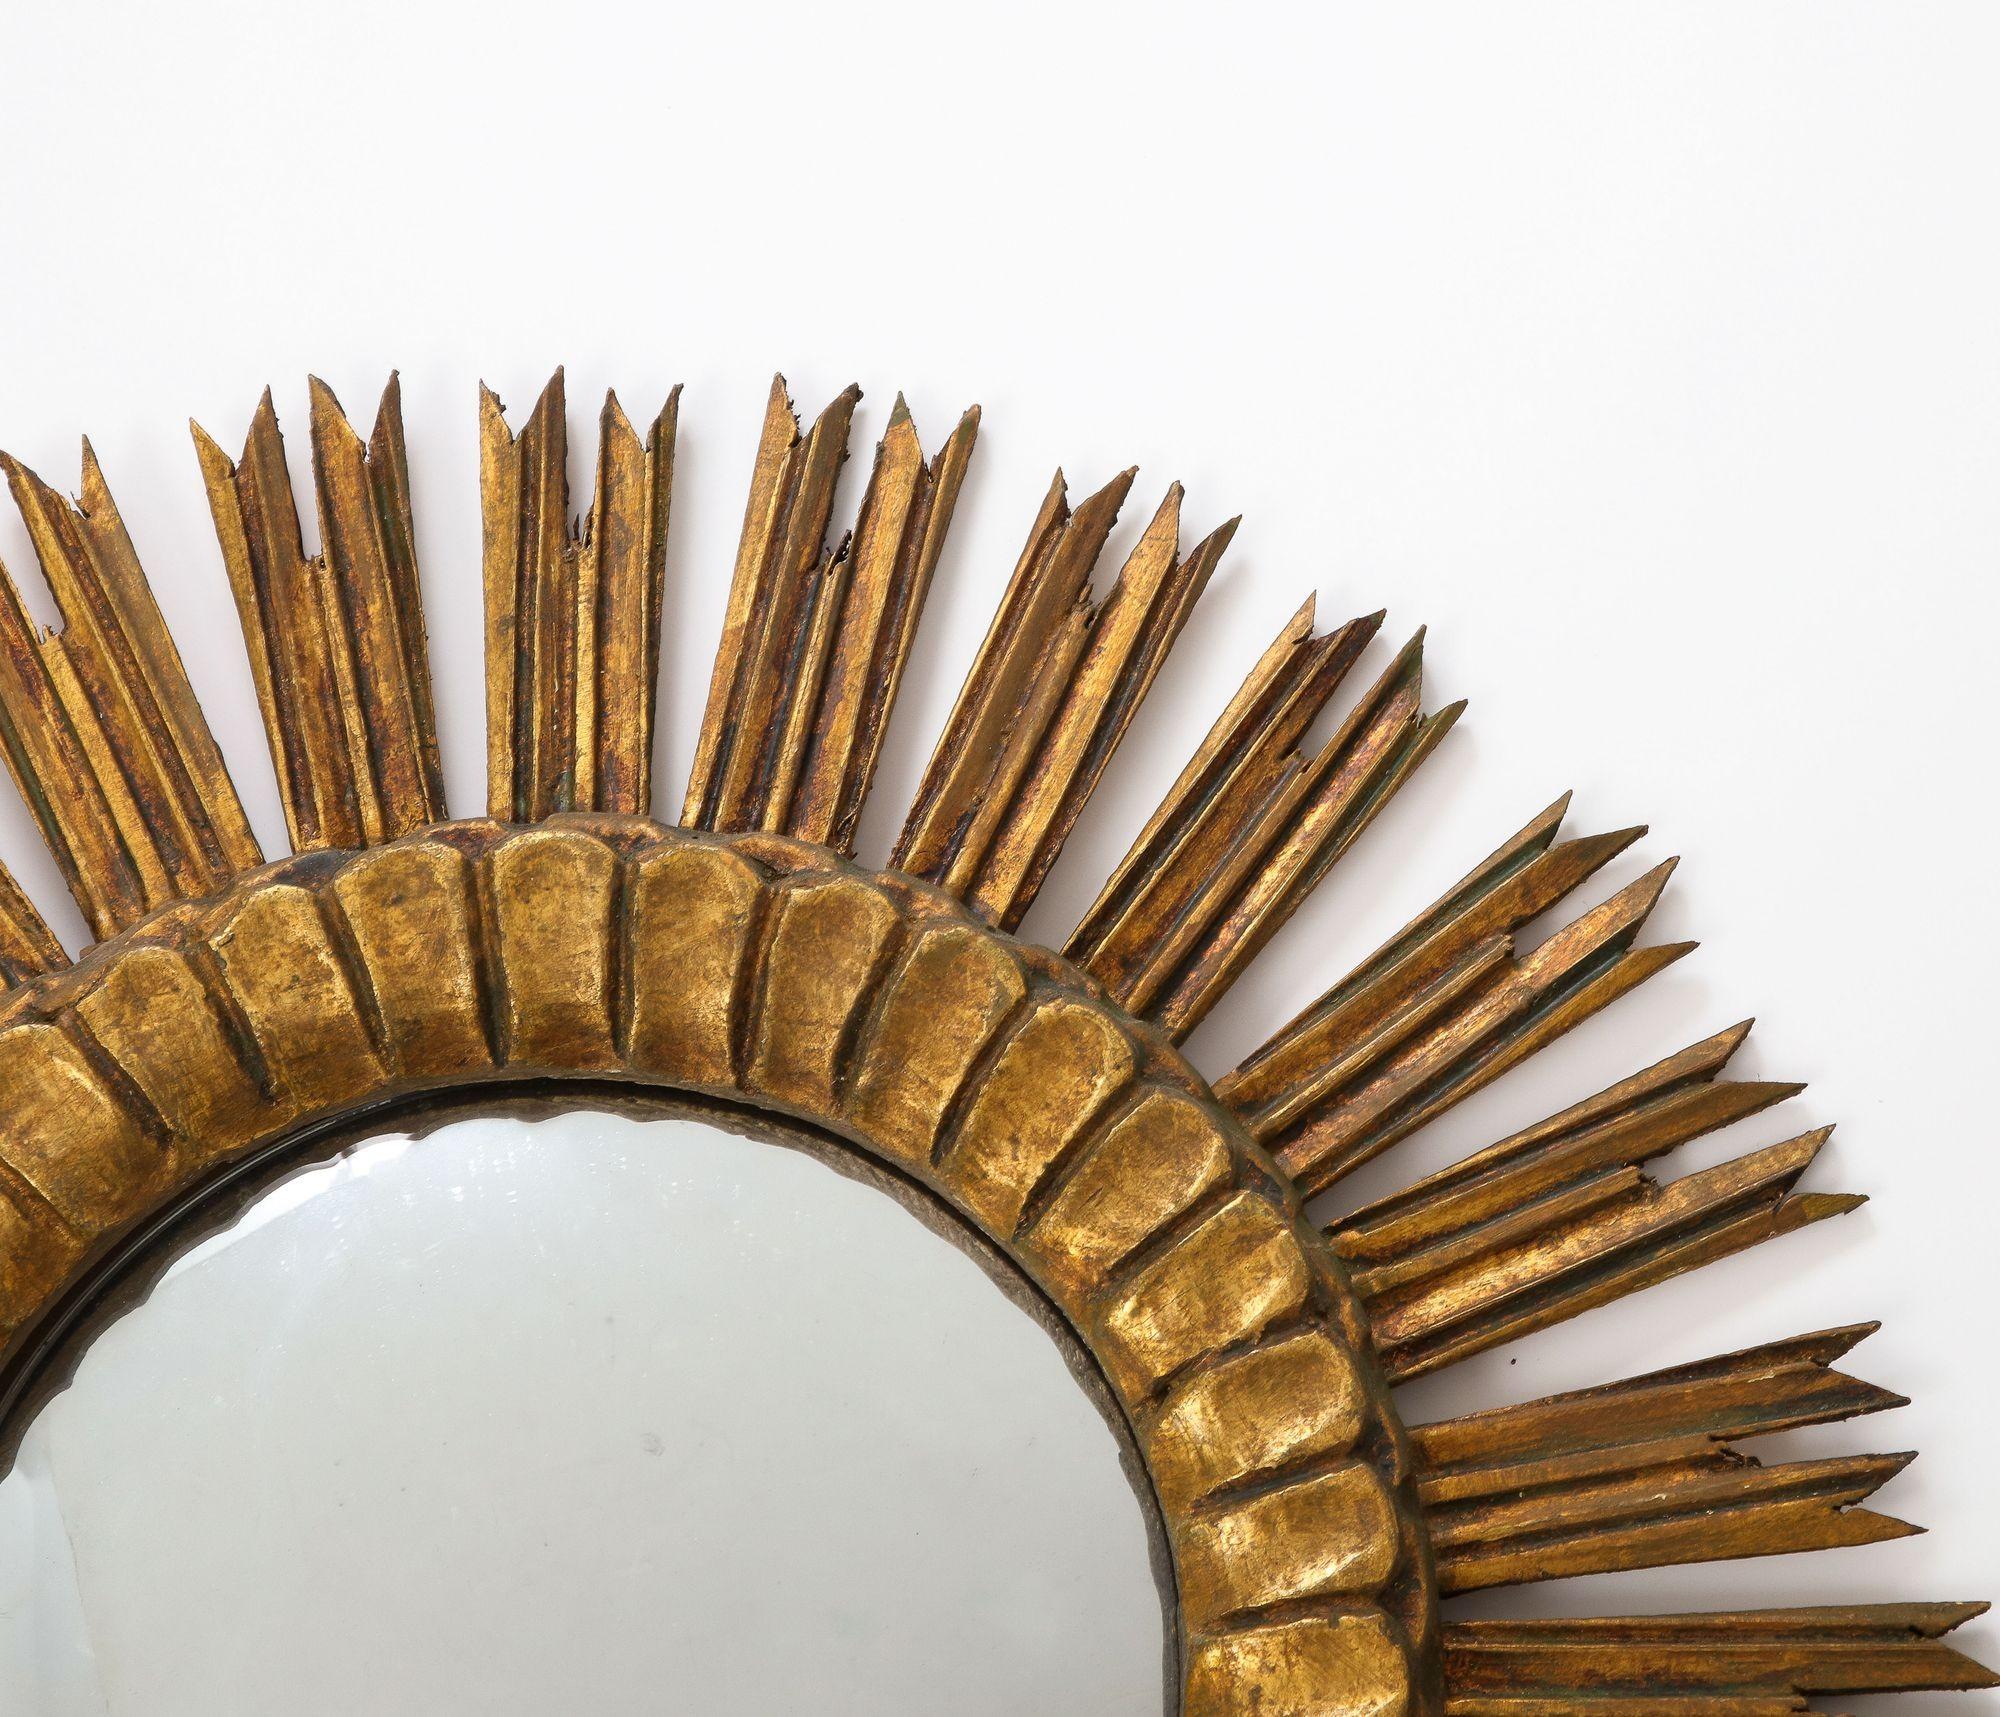 A 1950s small French sunburst mirror. The classic sunburst frame is made of giltwood and has mirror plate with age appropriate patina. Wear consistent with age and use.